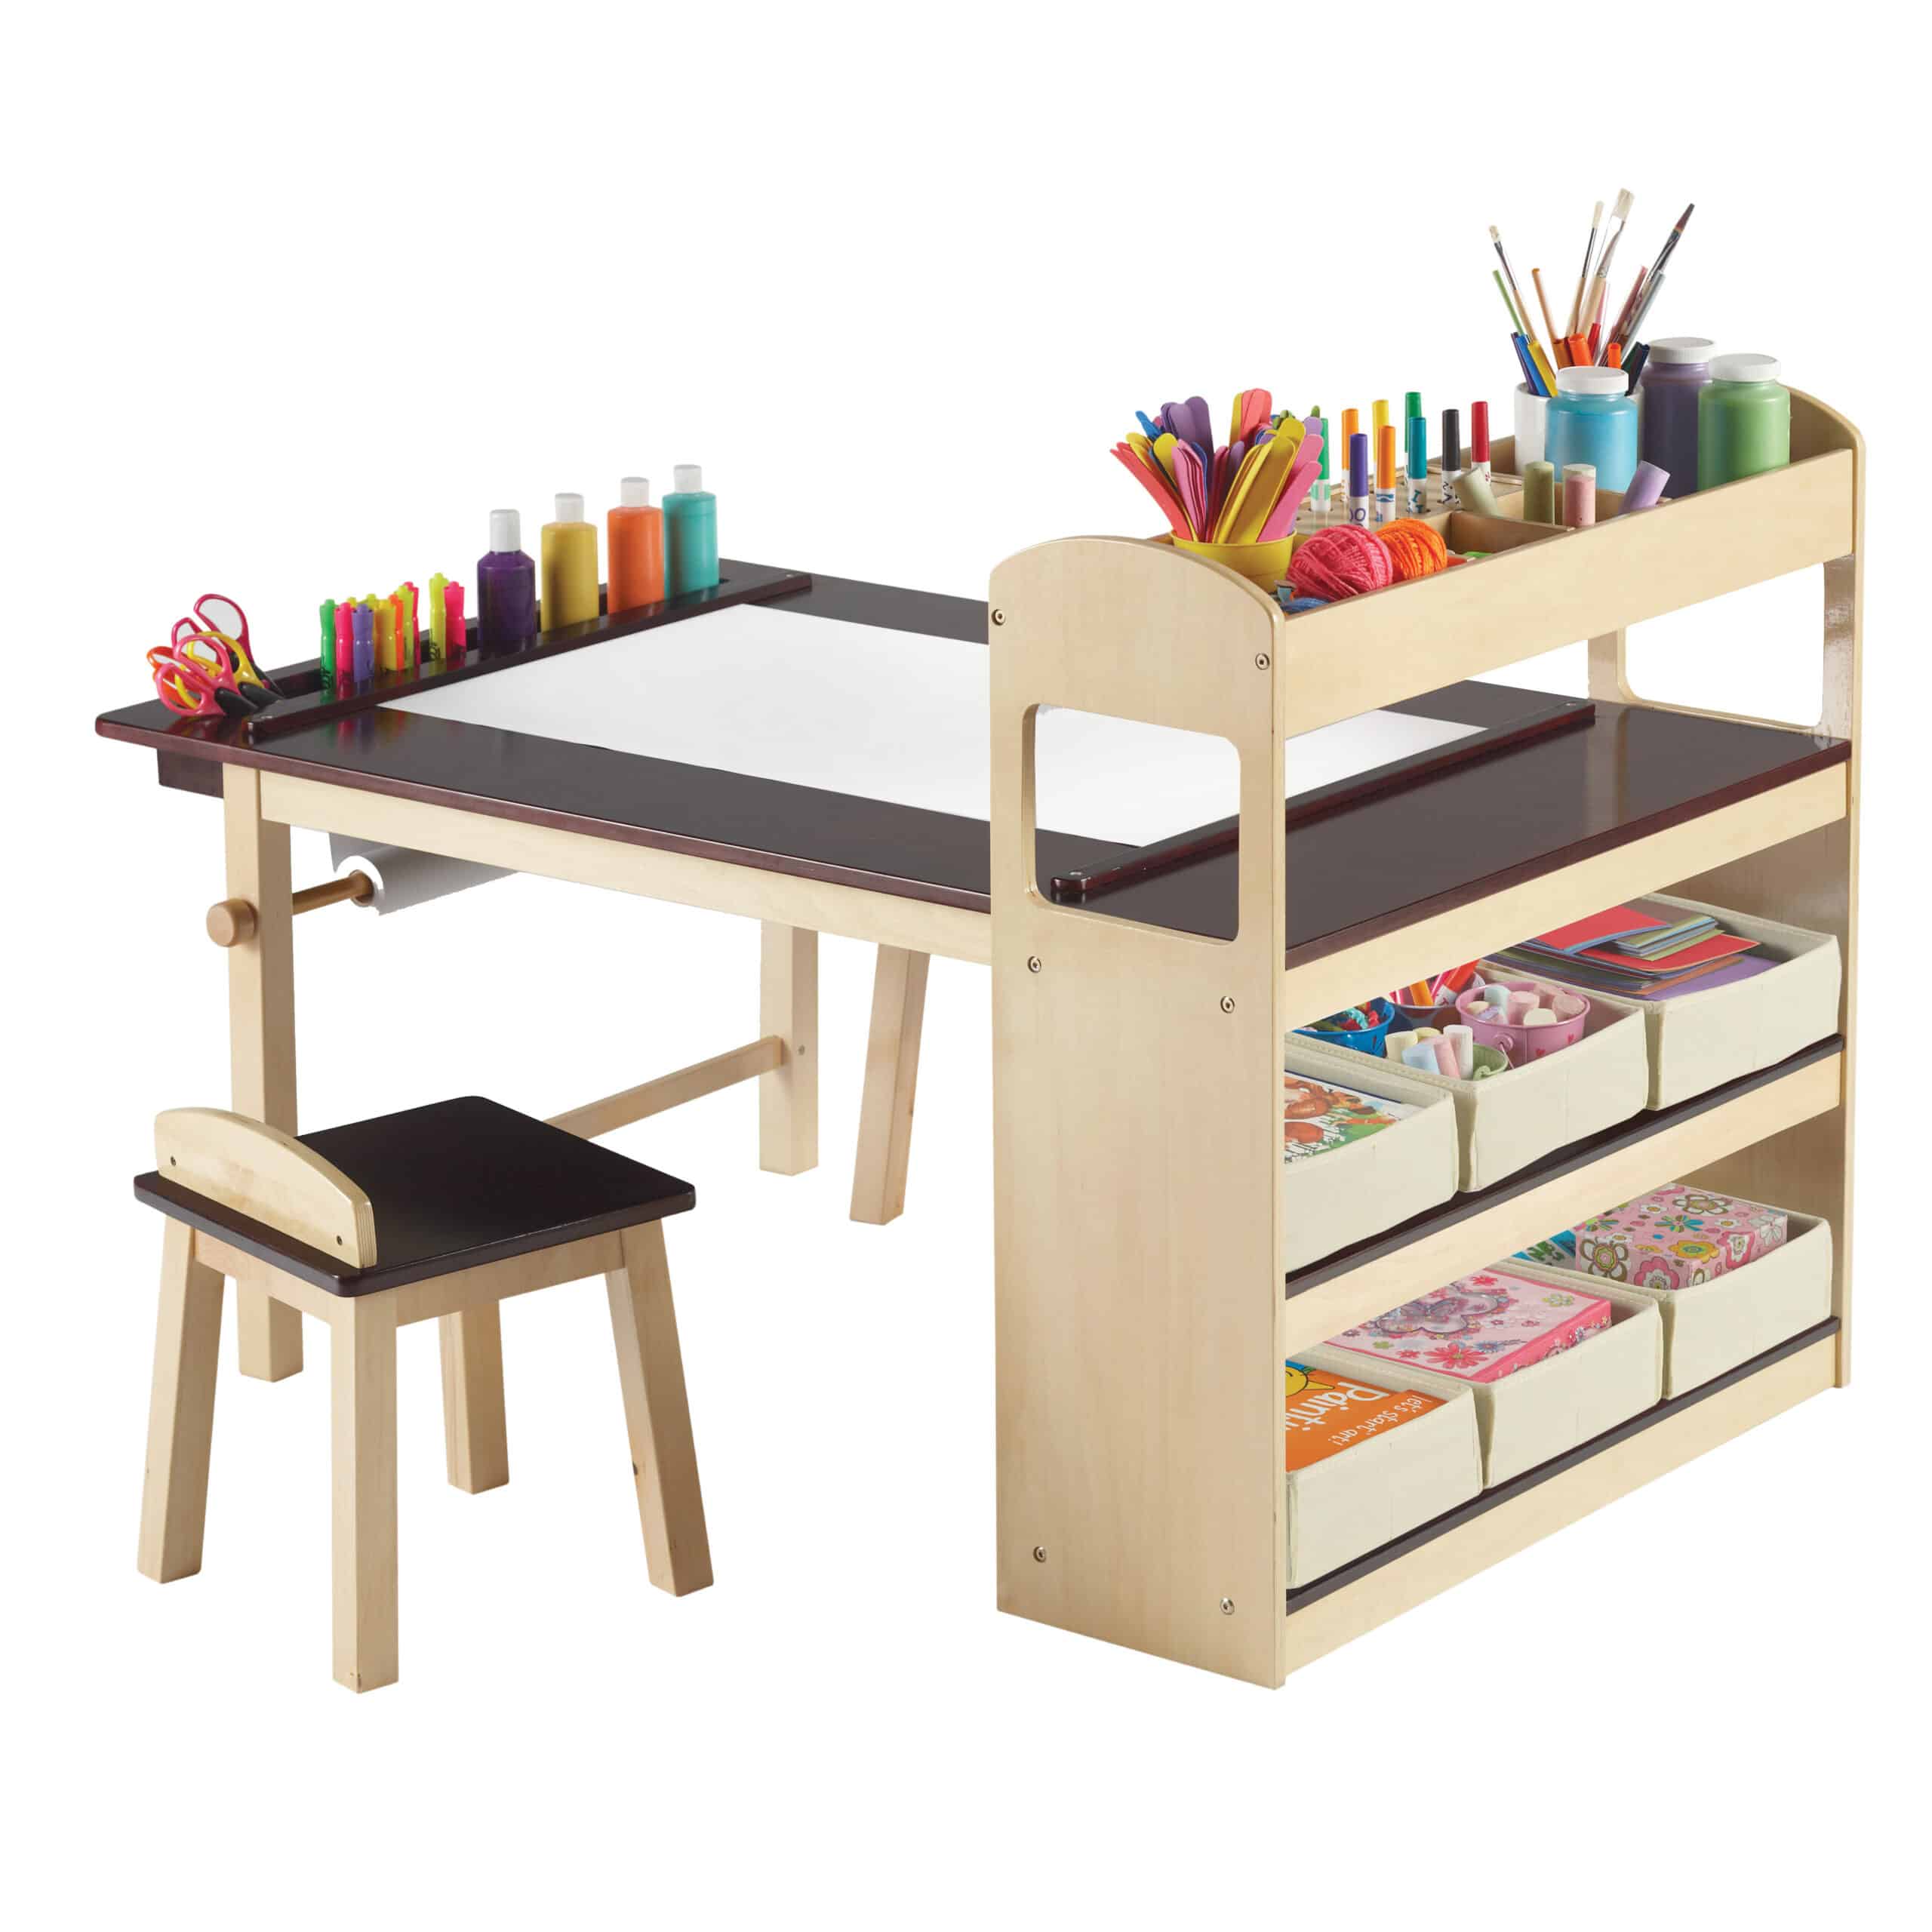 DEAL ALERT: Rectangular Arts and Crafts Table With Stools – 36% off